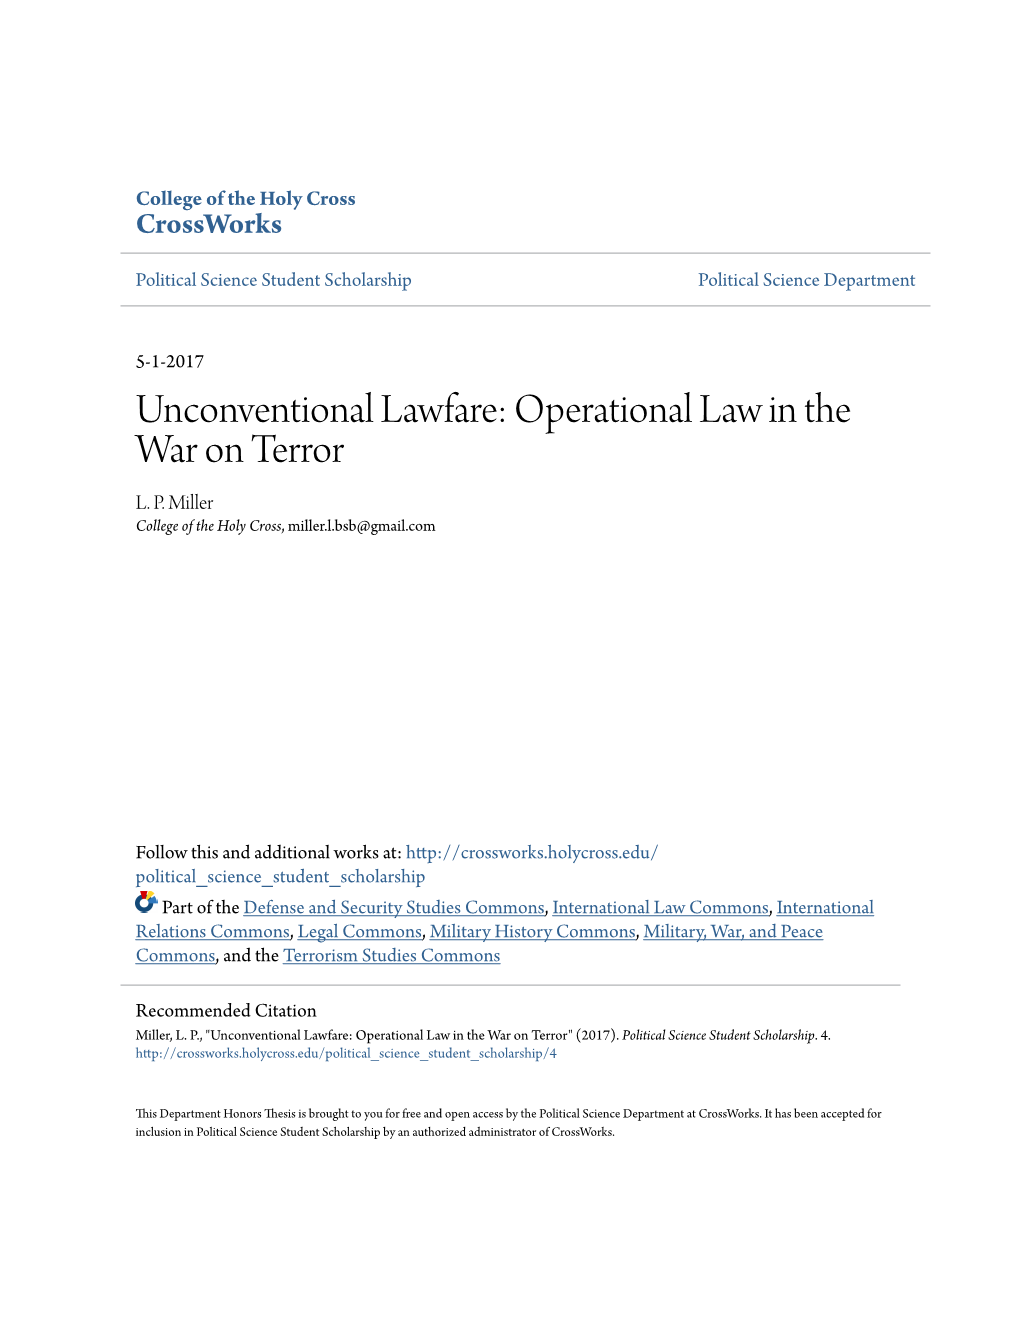 Operational Law in the War on Terror L